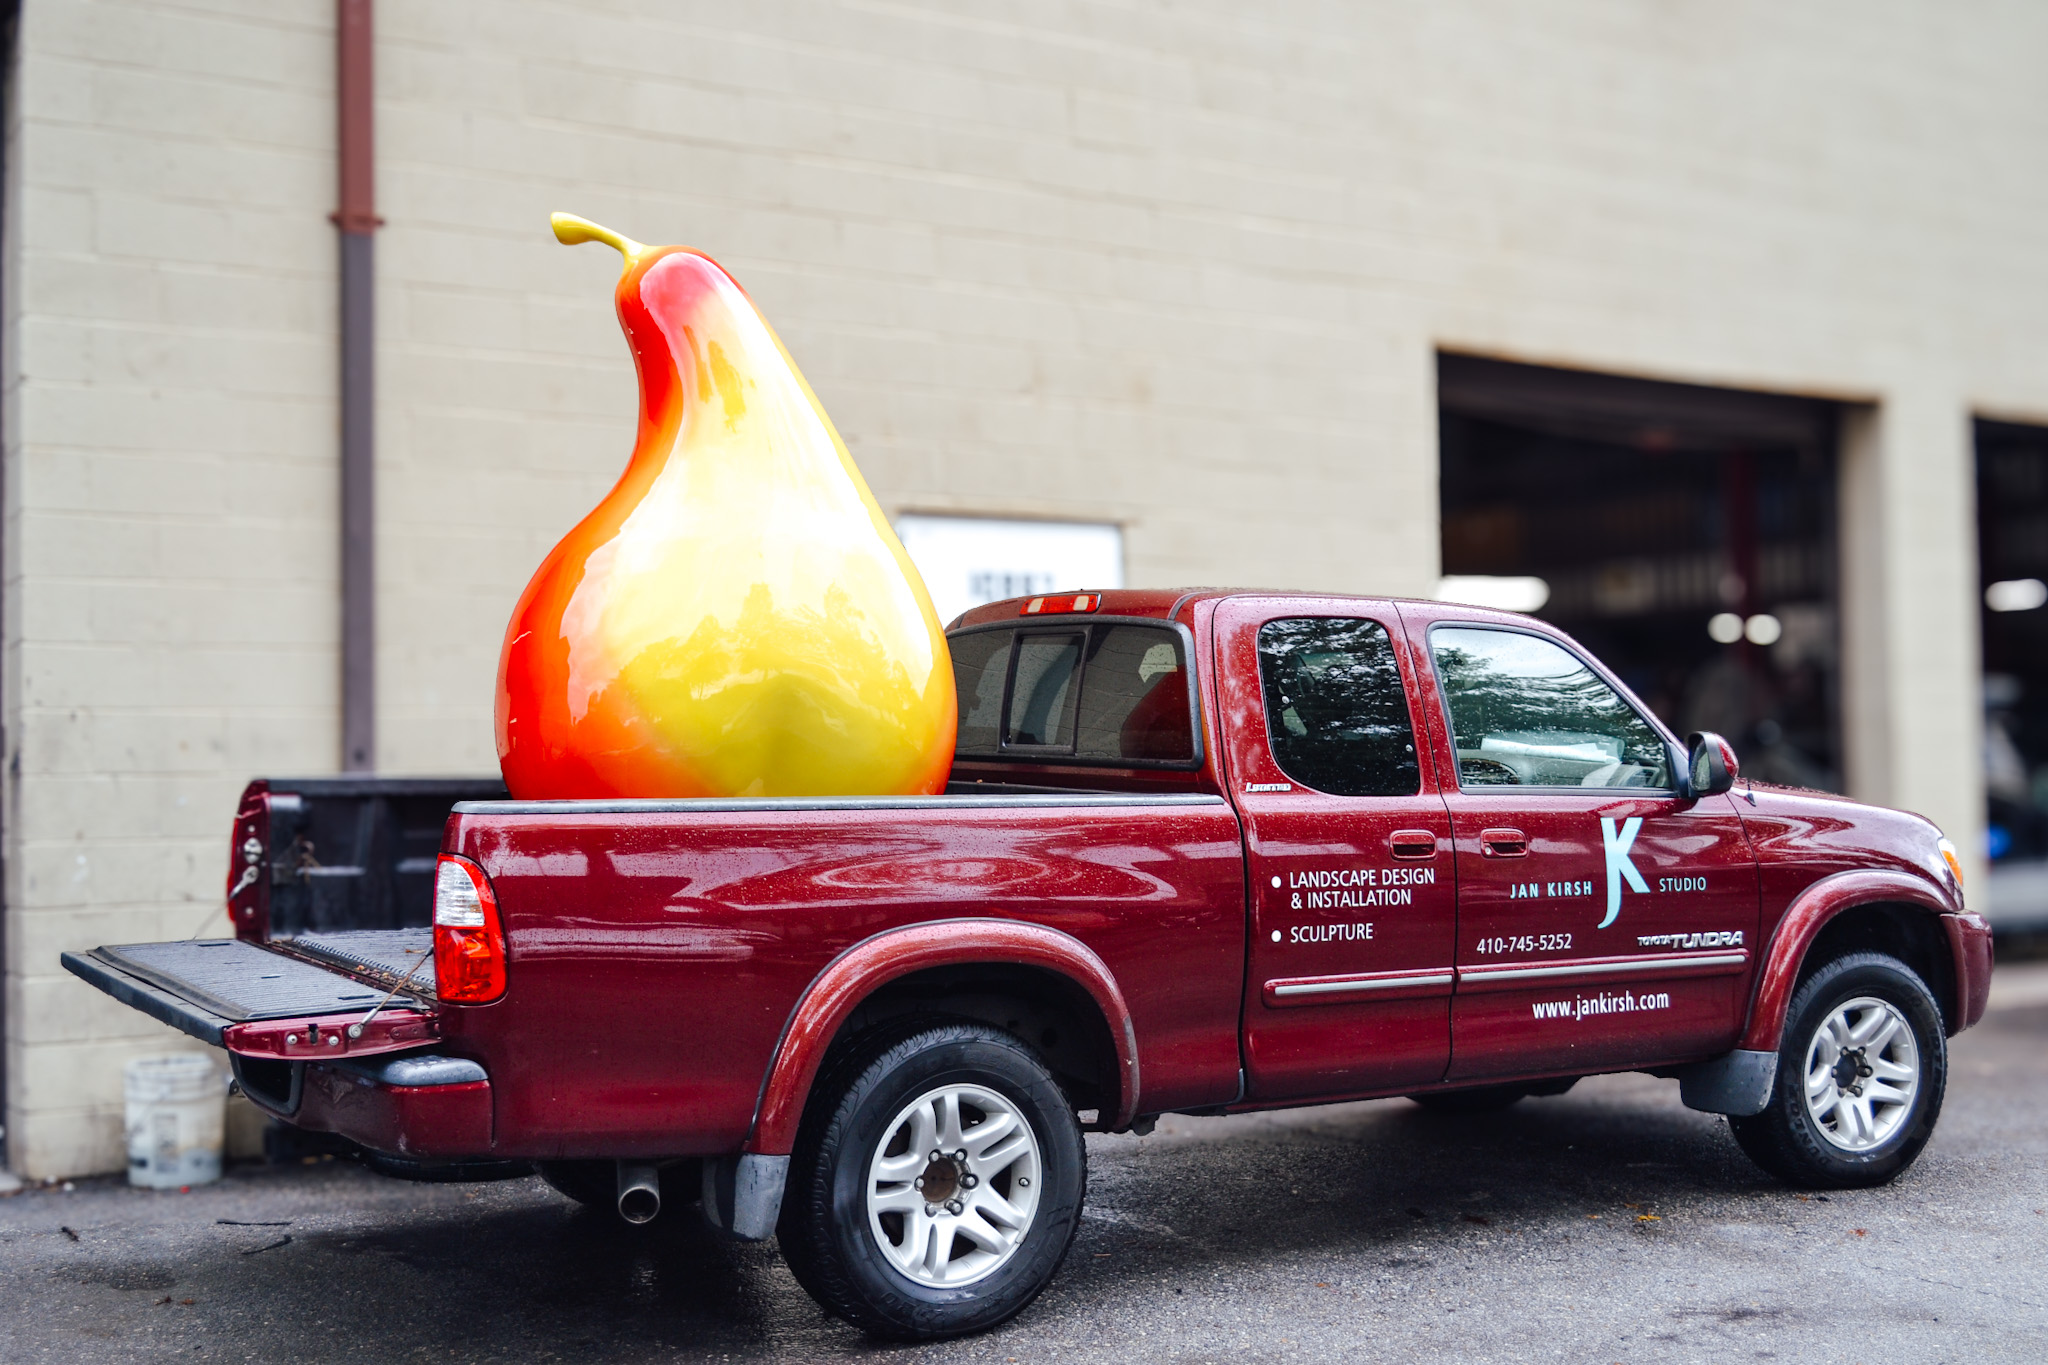 6-foot pear sculpture on its way to be installed at the George Howard Building in Howard County, Md.